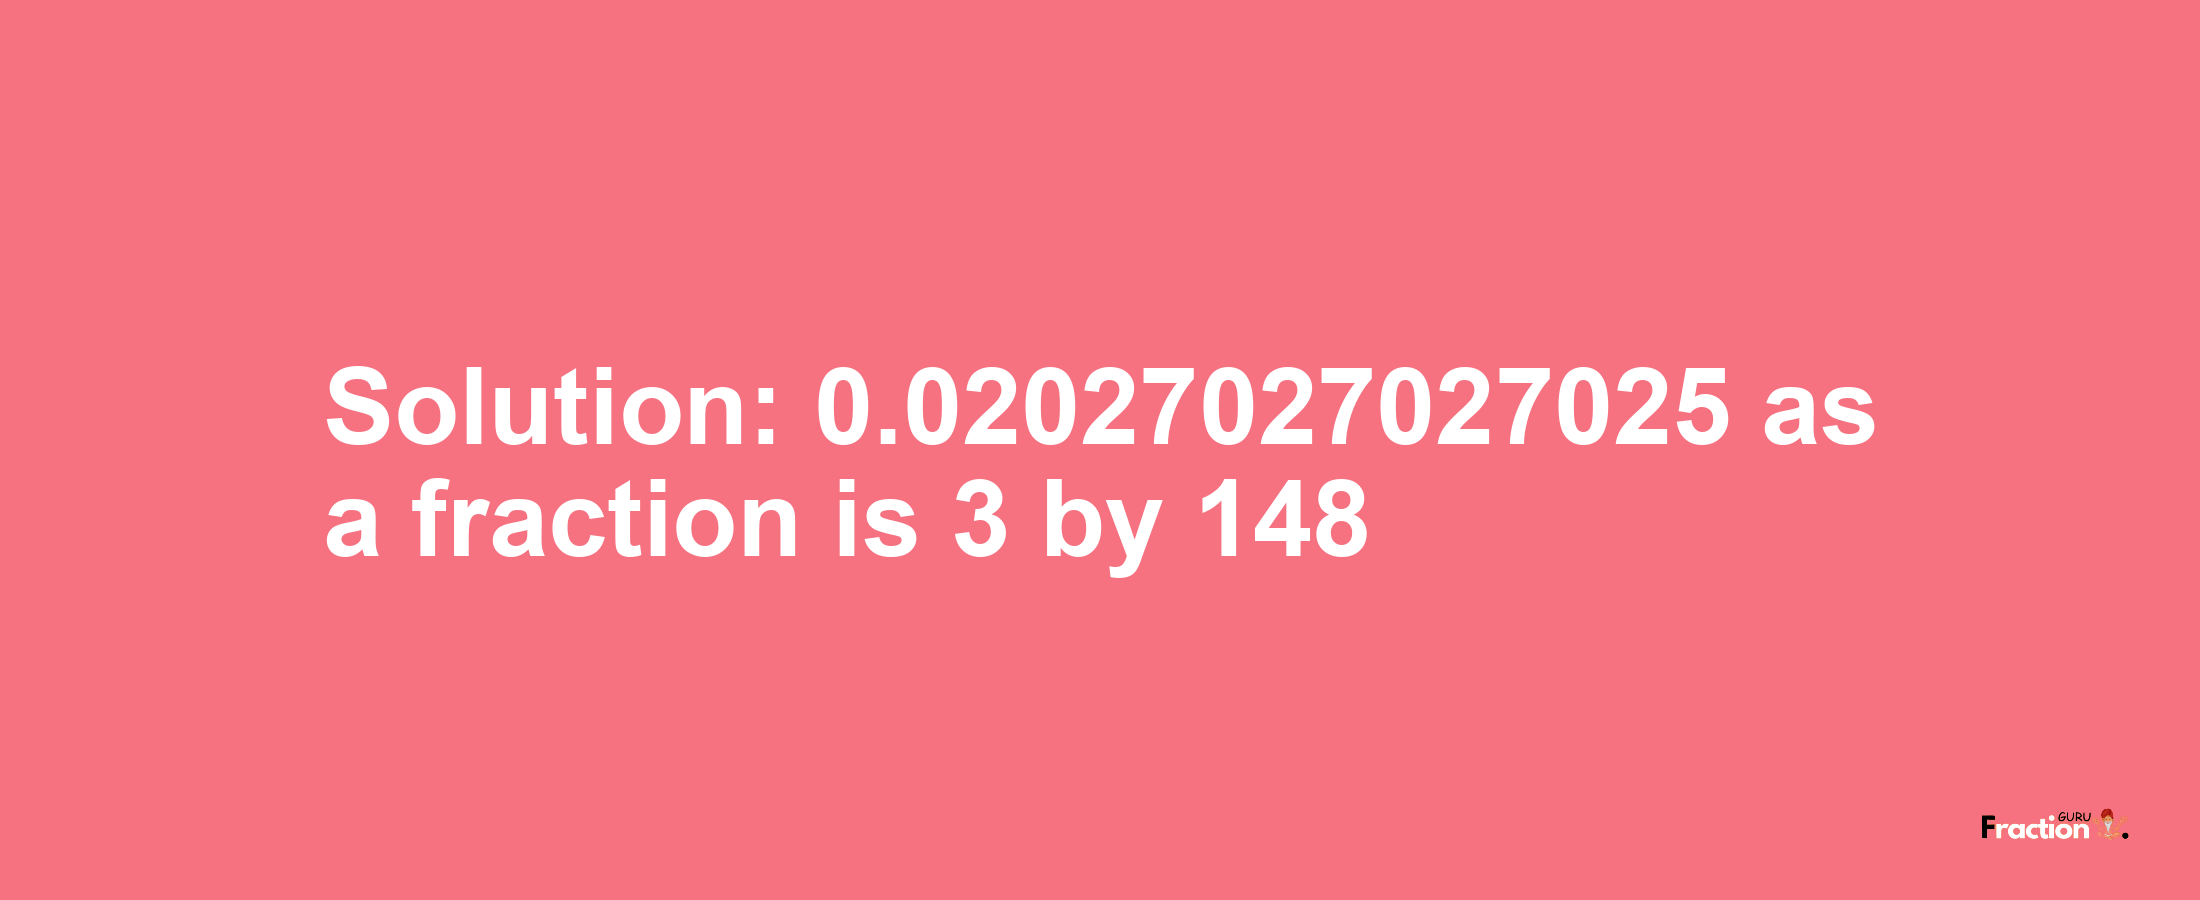 Solution:0.02027027027025 as a fraction is 3/148